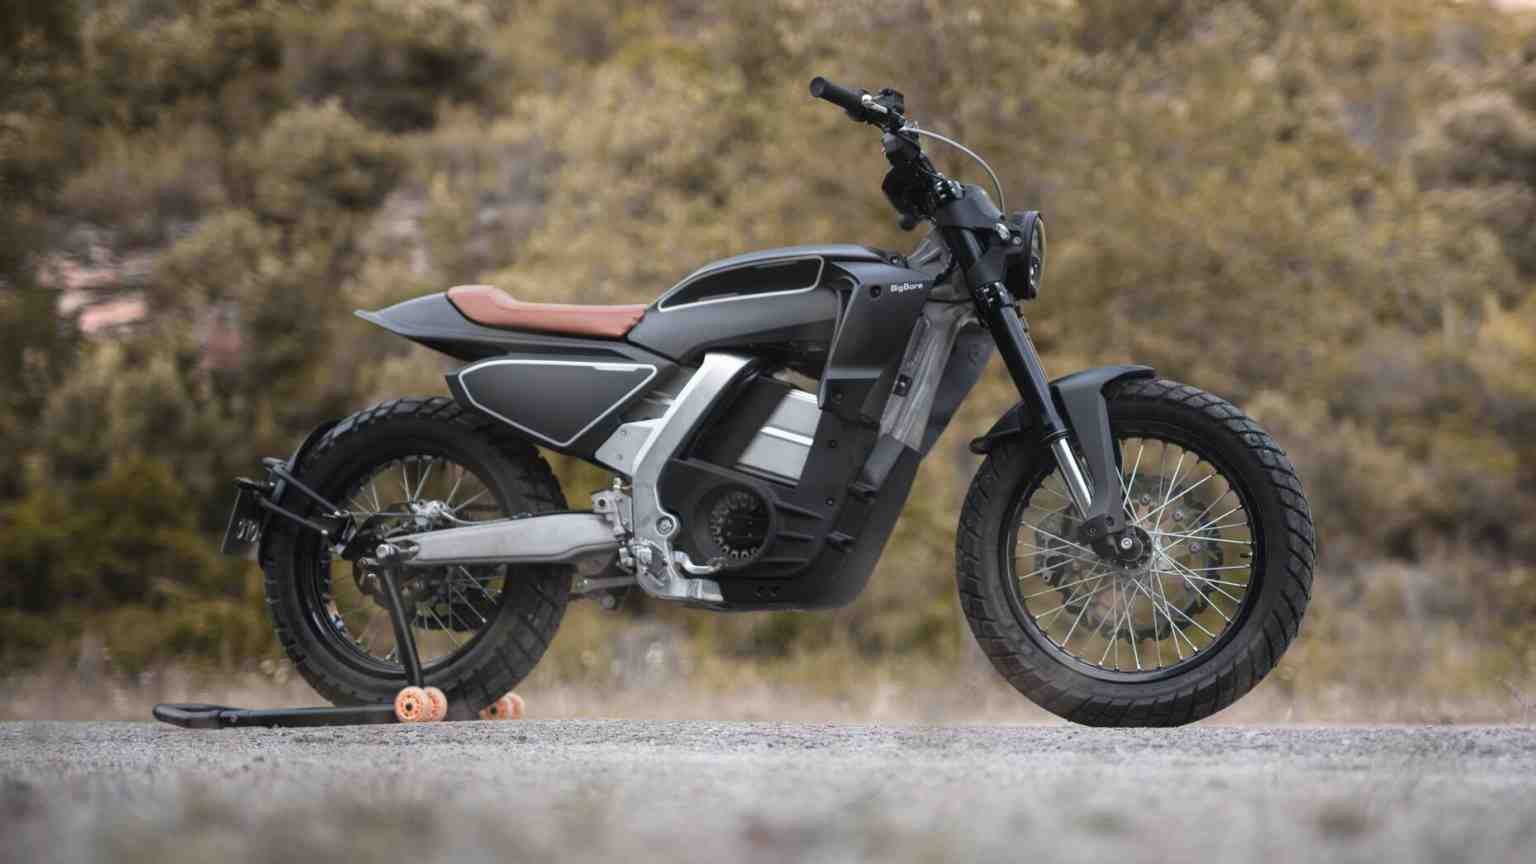 Does Indian make an electric motorcycle?